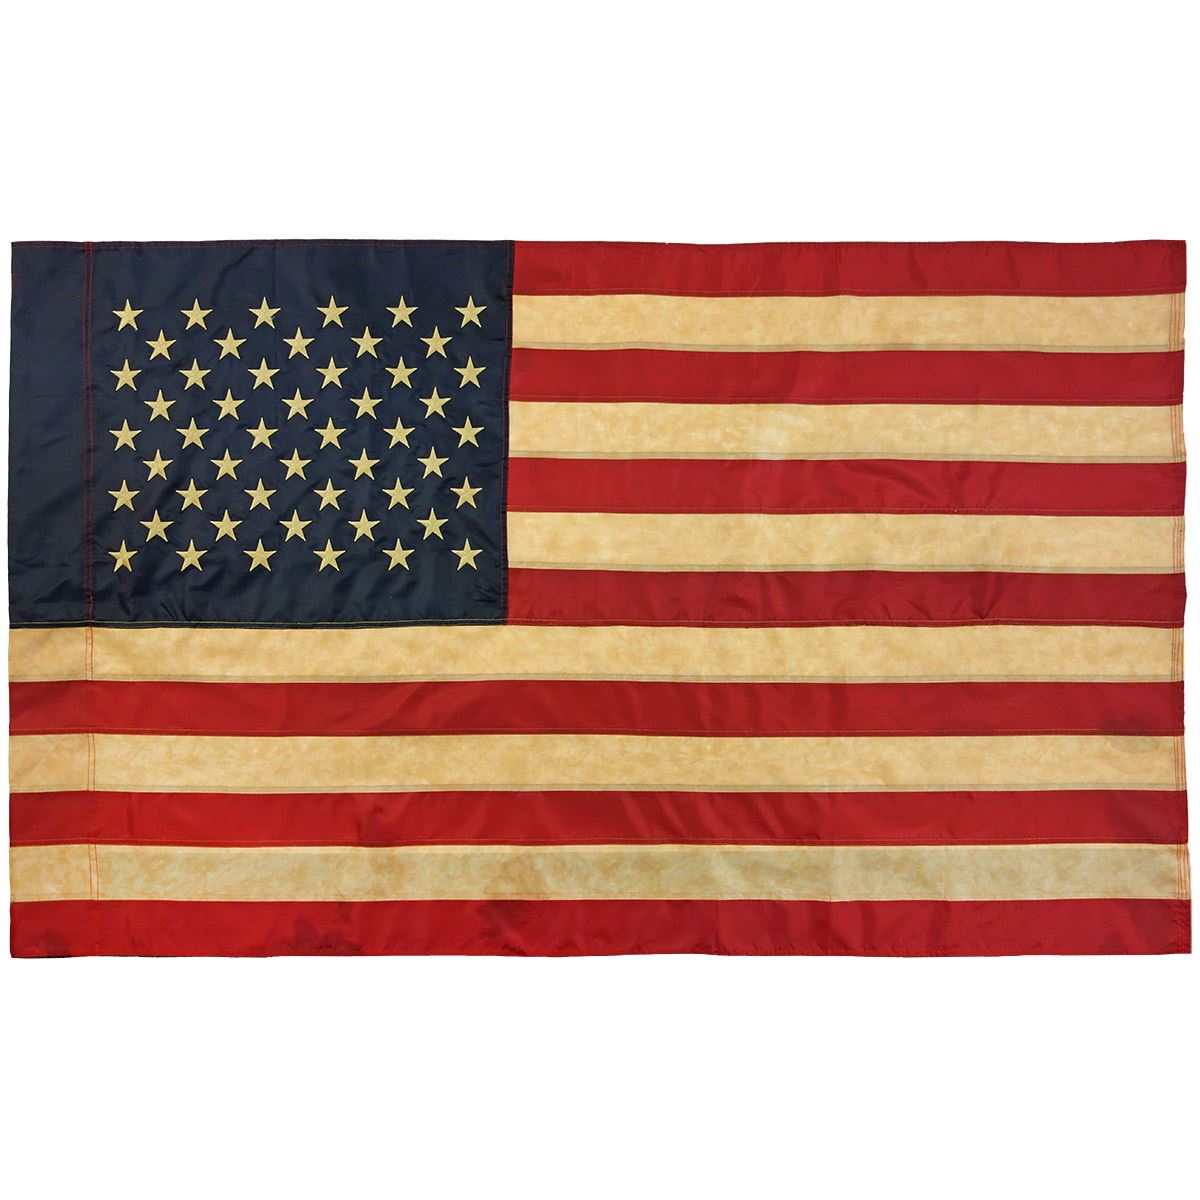 Hanging Tea-Stained American Flag